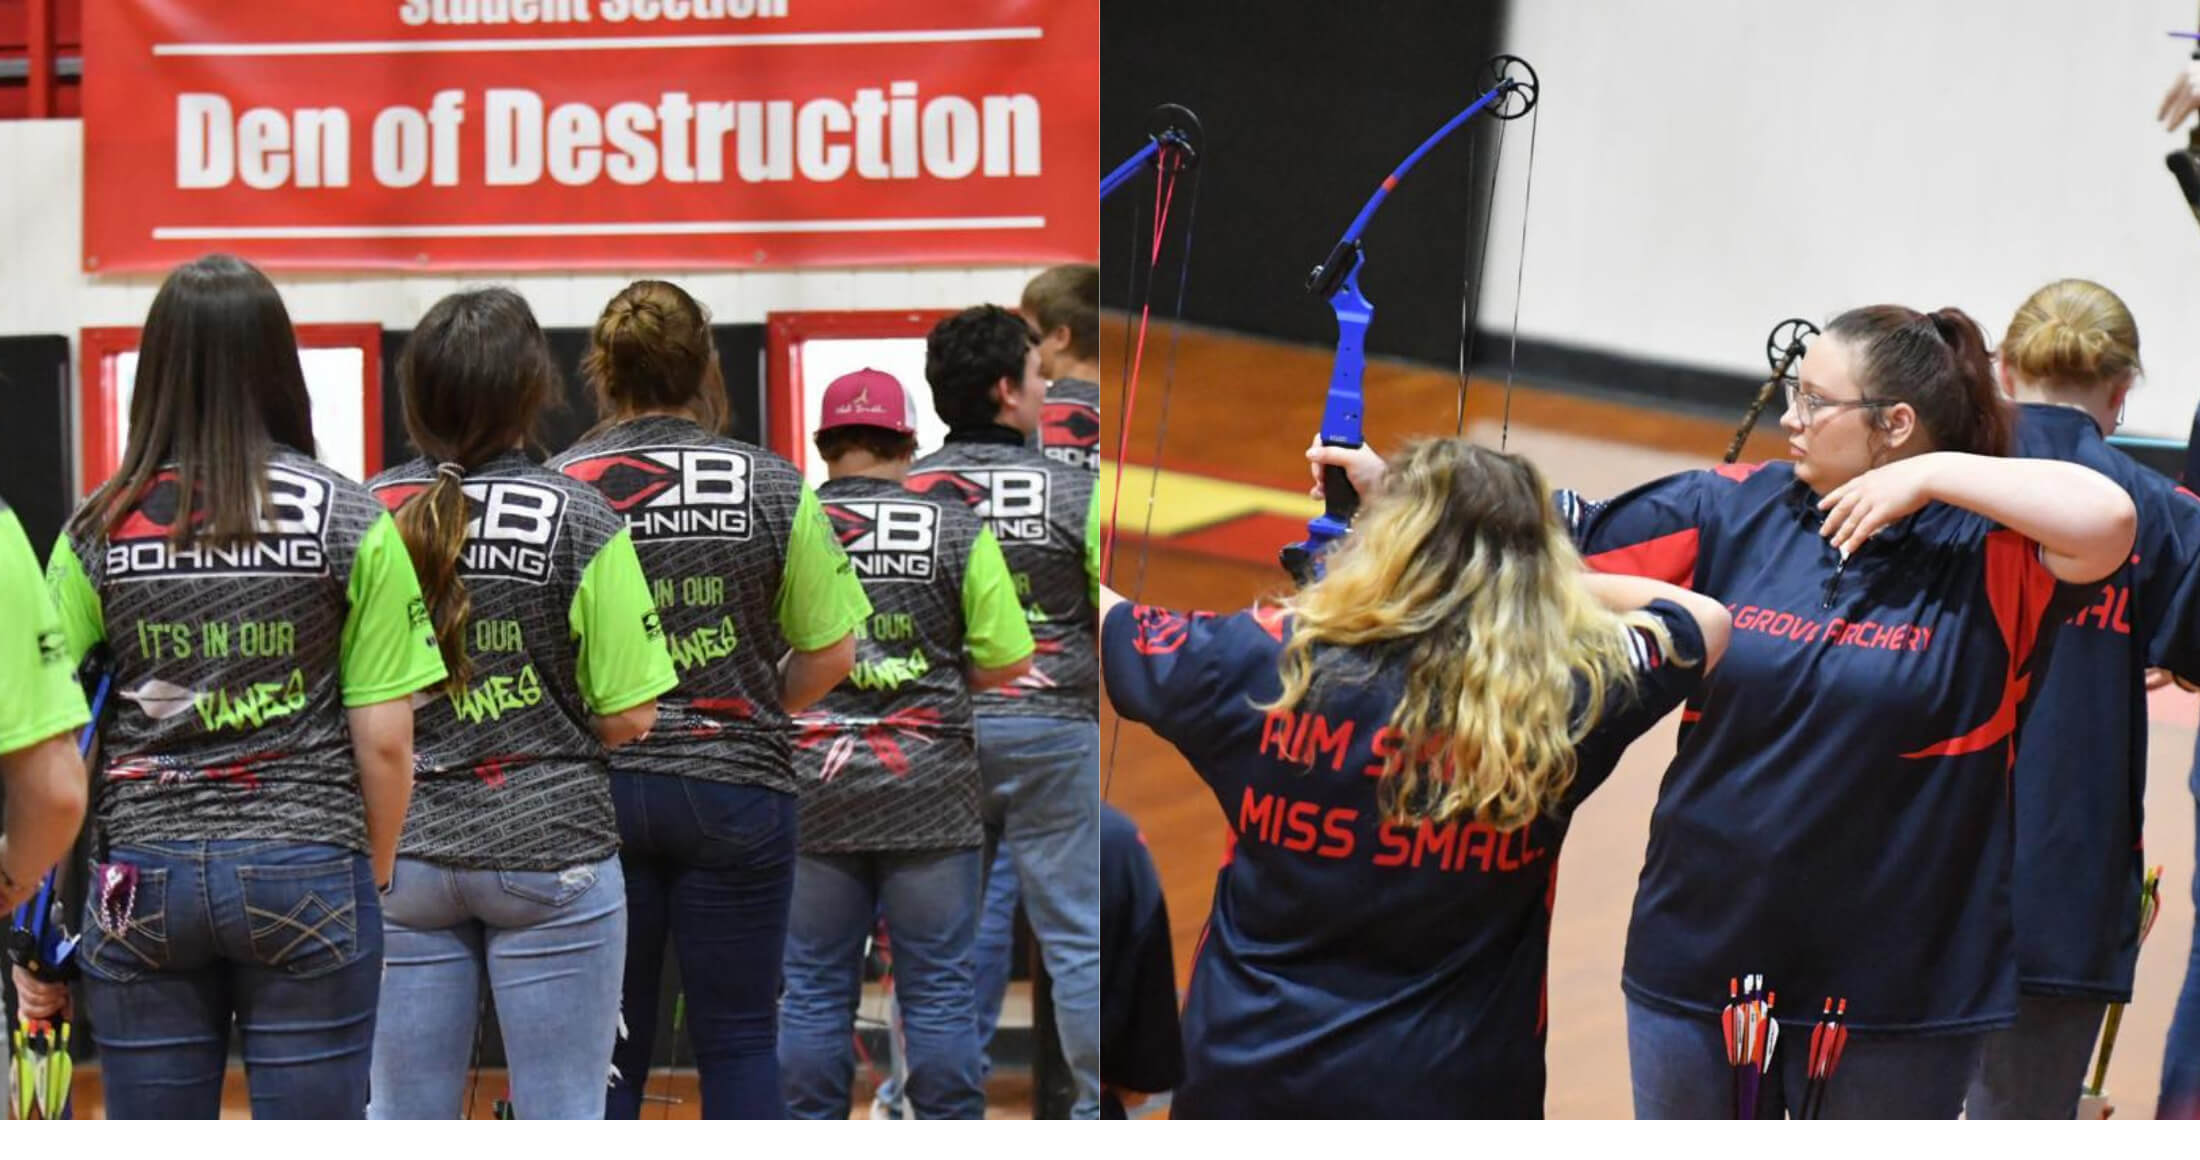 Twice as nice: Pine Grove and Walnut take home state titles in archery